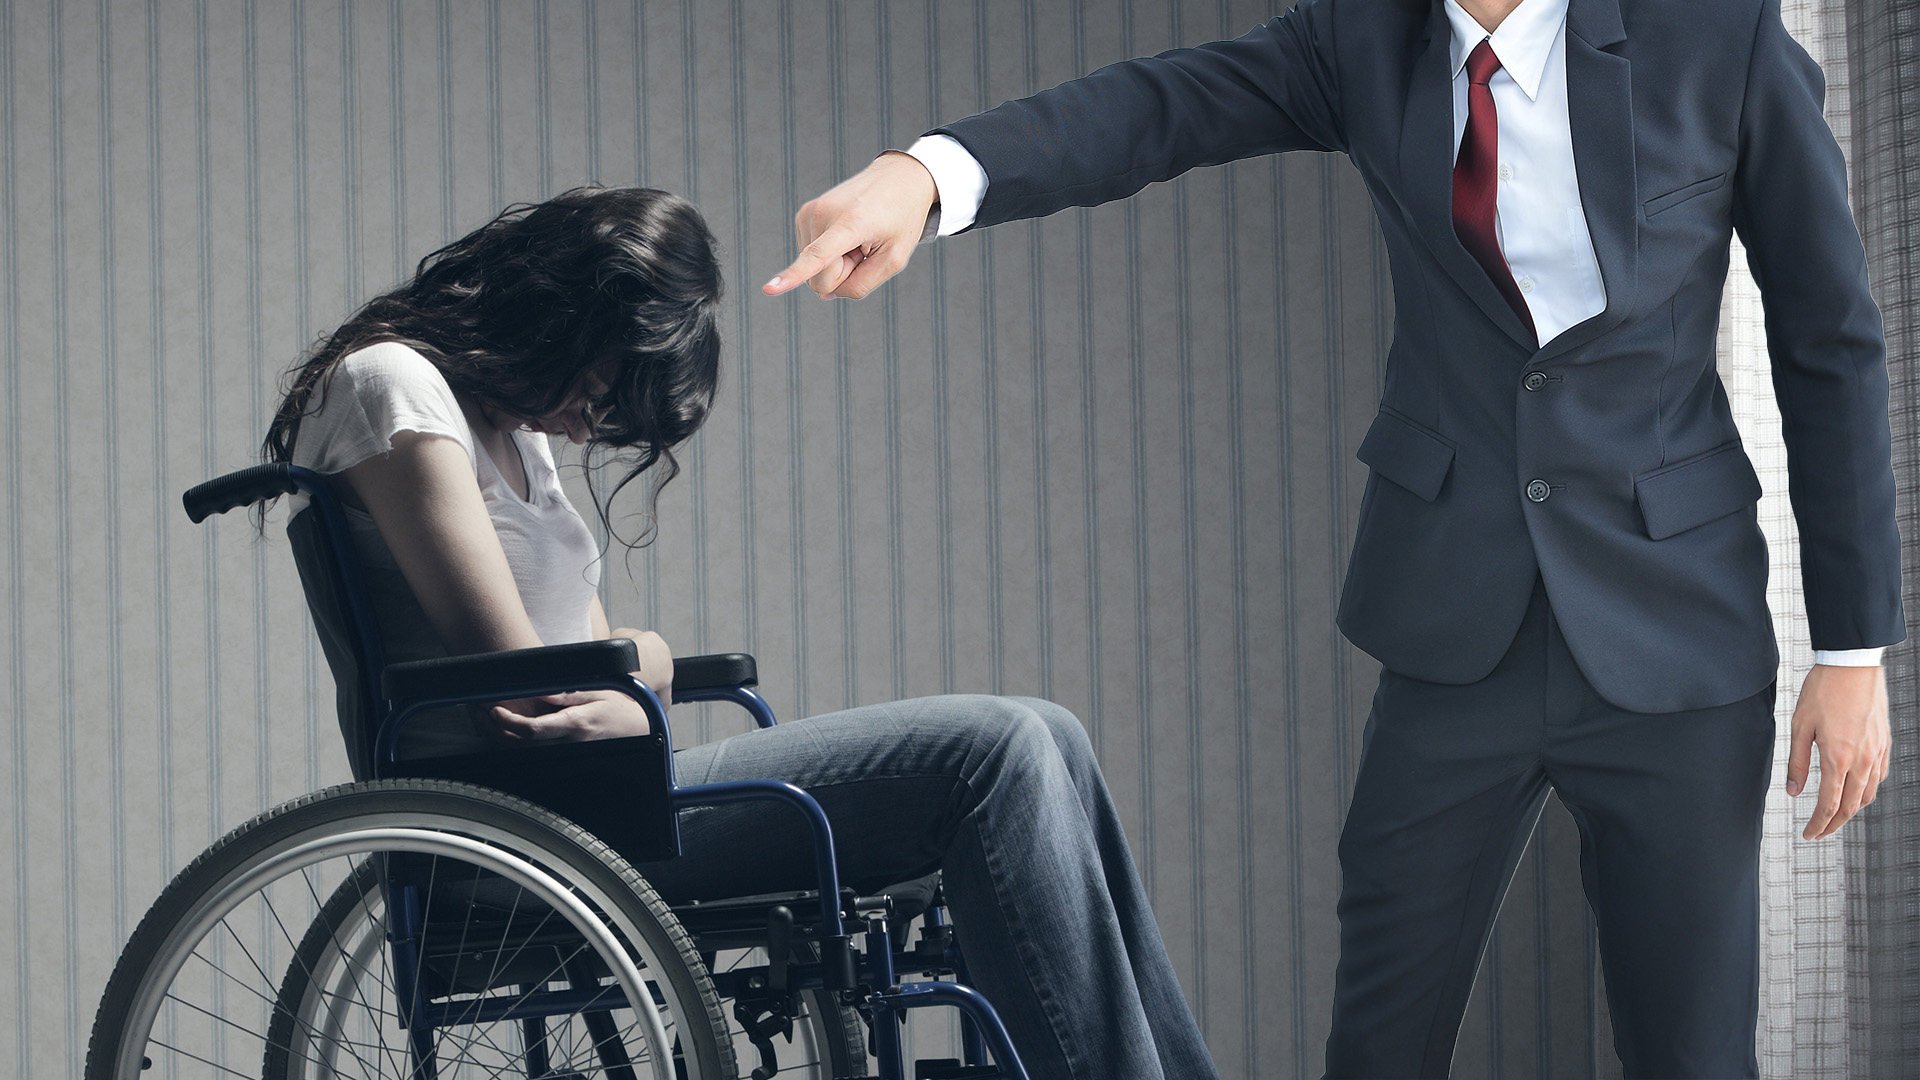 A court in China has ordered an abusive husband who called his disabled wife “trash” to pay her US$4,200 in compensation. Photo: SCMP composite/Shutterstock